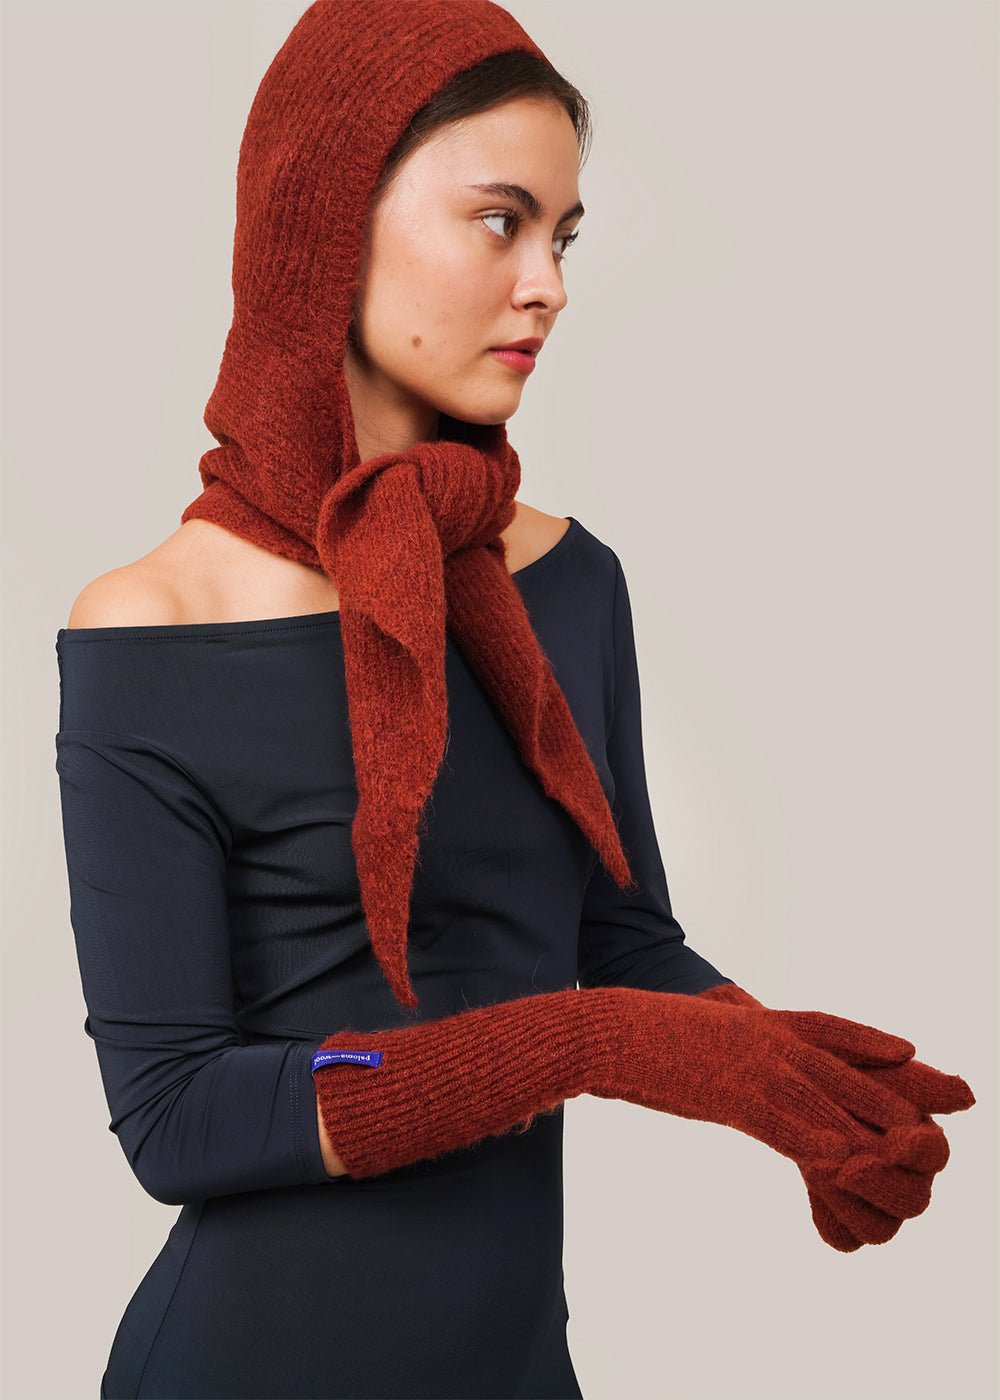 Paloma Wool Wine Peter Gloves - New Classics Studios Sustainable Ethical Fashion Canada